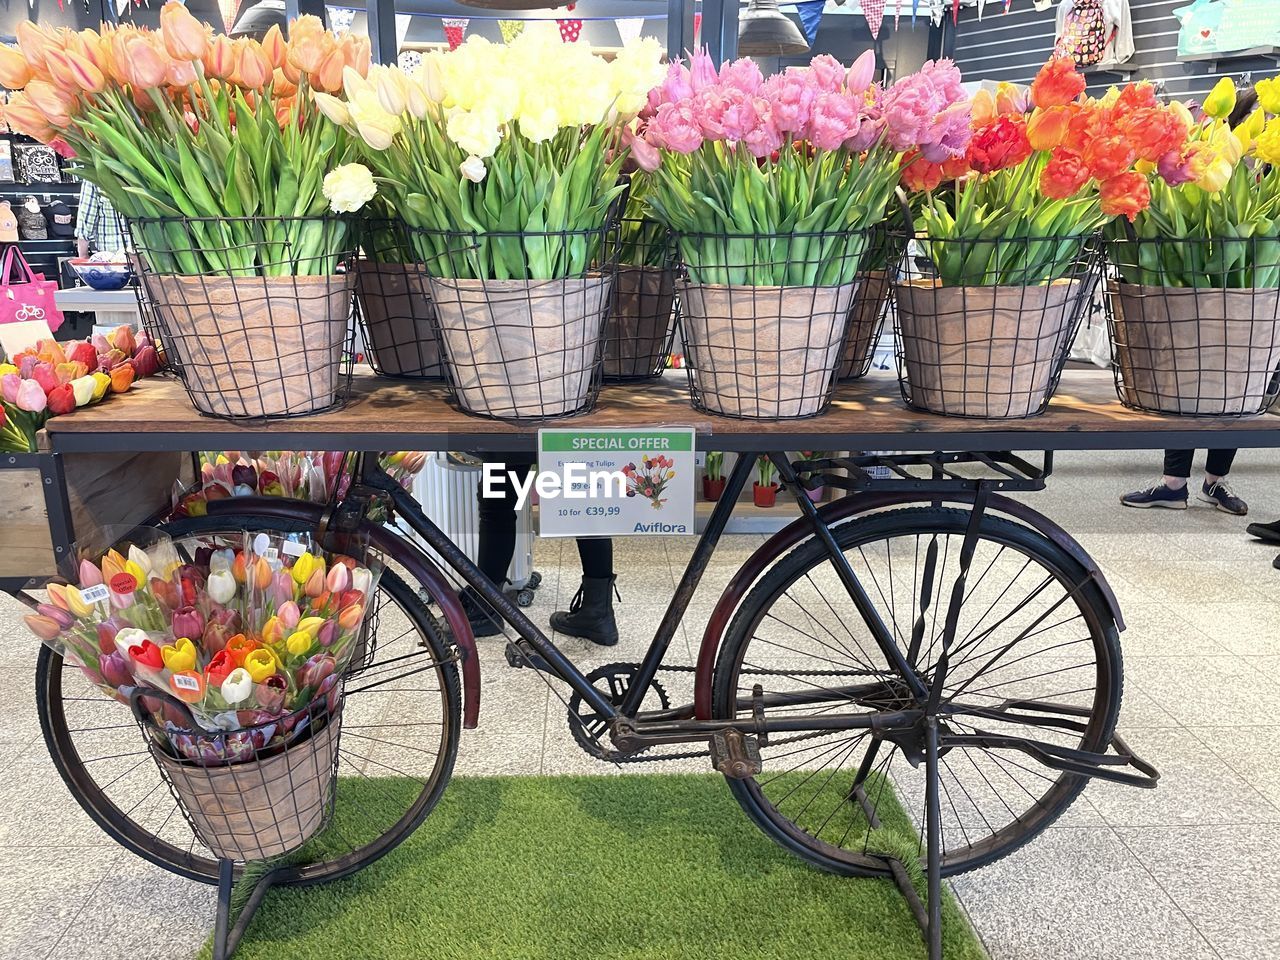 flowering plant, flower, plant, transportation, bicycle, basket, freshness, mode of transportation, nature, retail, container, vehicle, land vehicle, city, potted plant, day, no people, street, outdoors, variation, multi colored, growth, arrangement, floristry, market, for sale, architecture, beauty in nature, abundance, large group of objects, business, bicycle basket, cart, small business, flowerpot